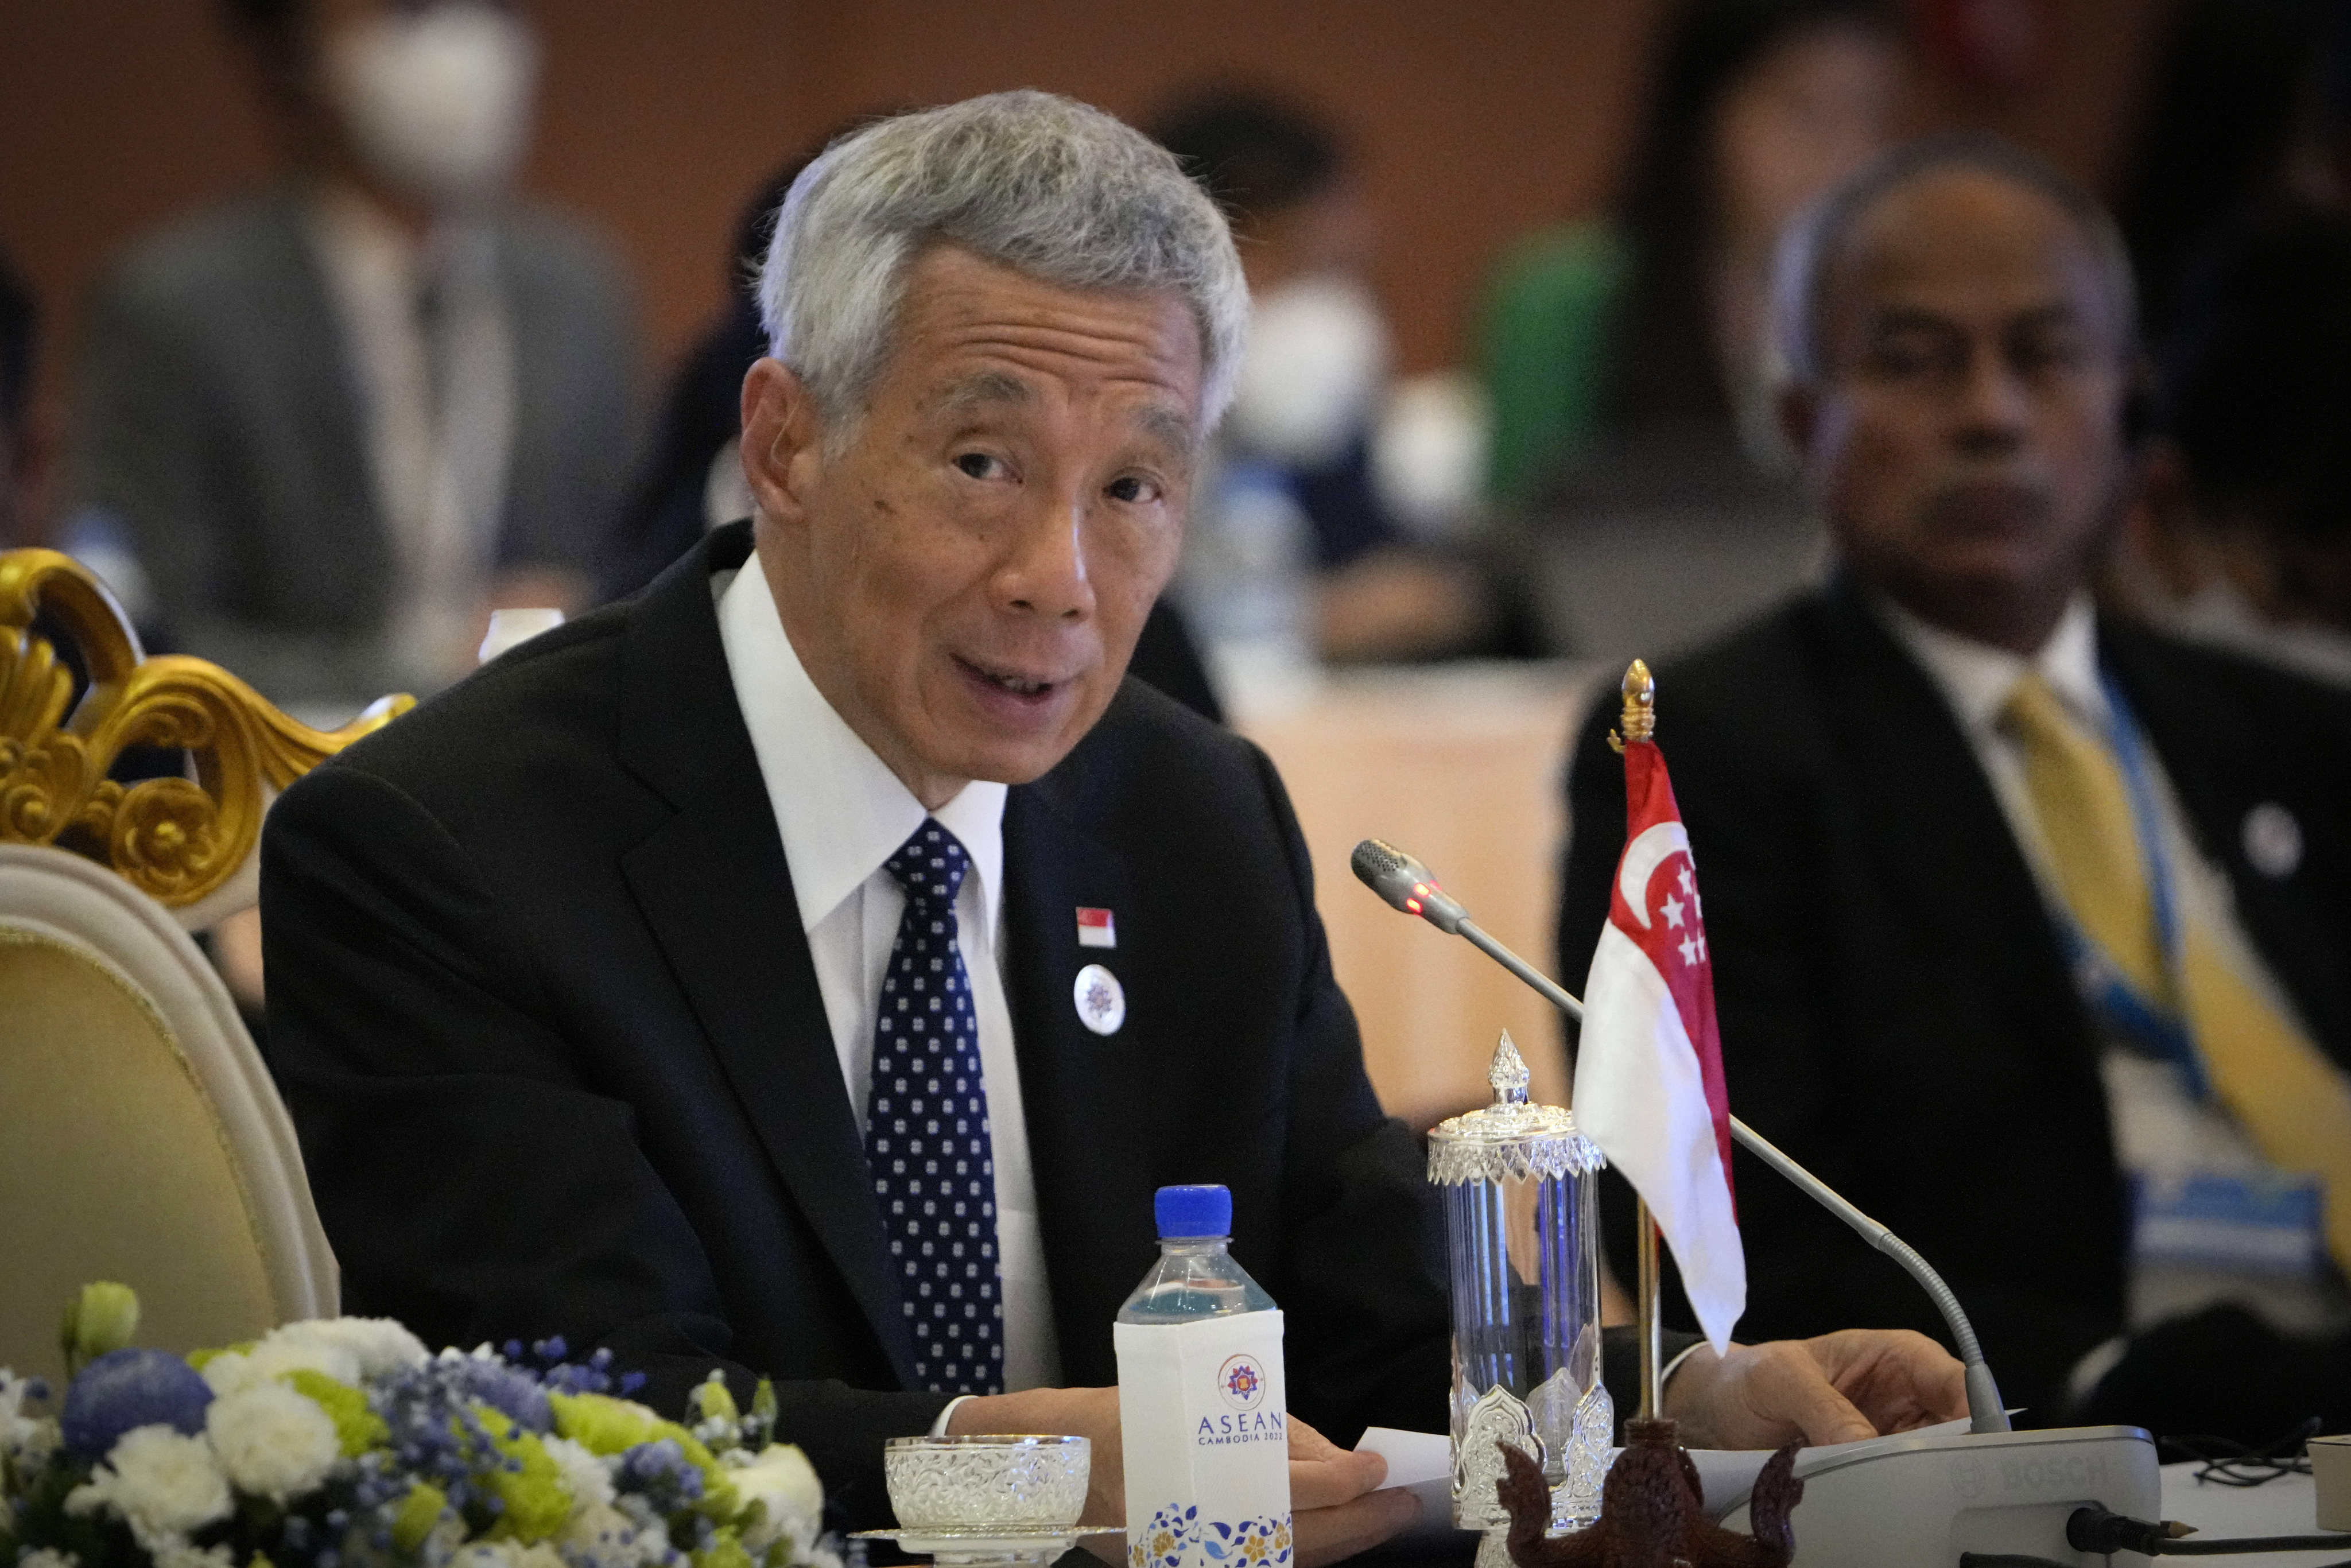 Singapore’s Prime Minister Lee Hsien Loong. Photo: AP